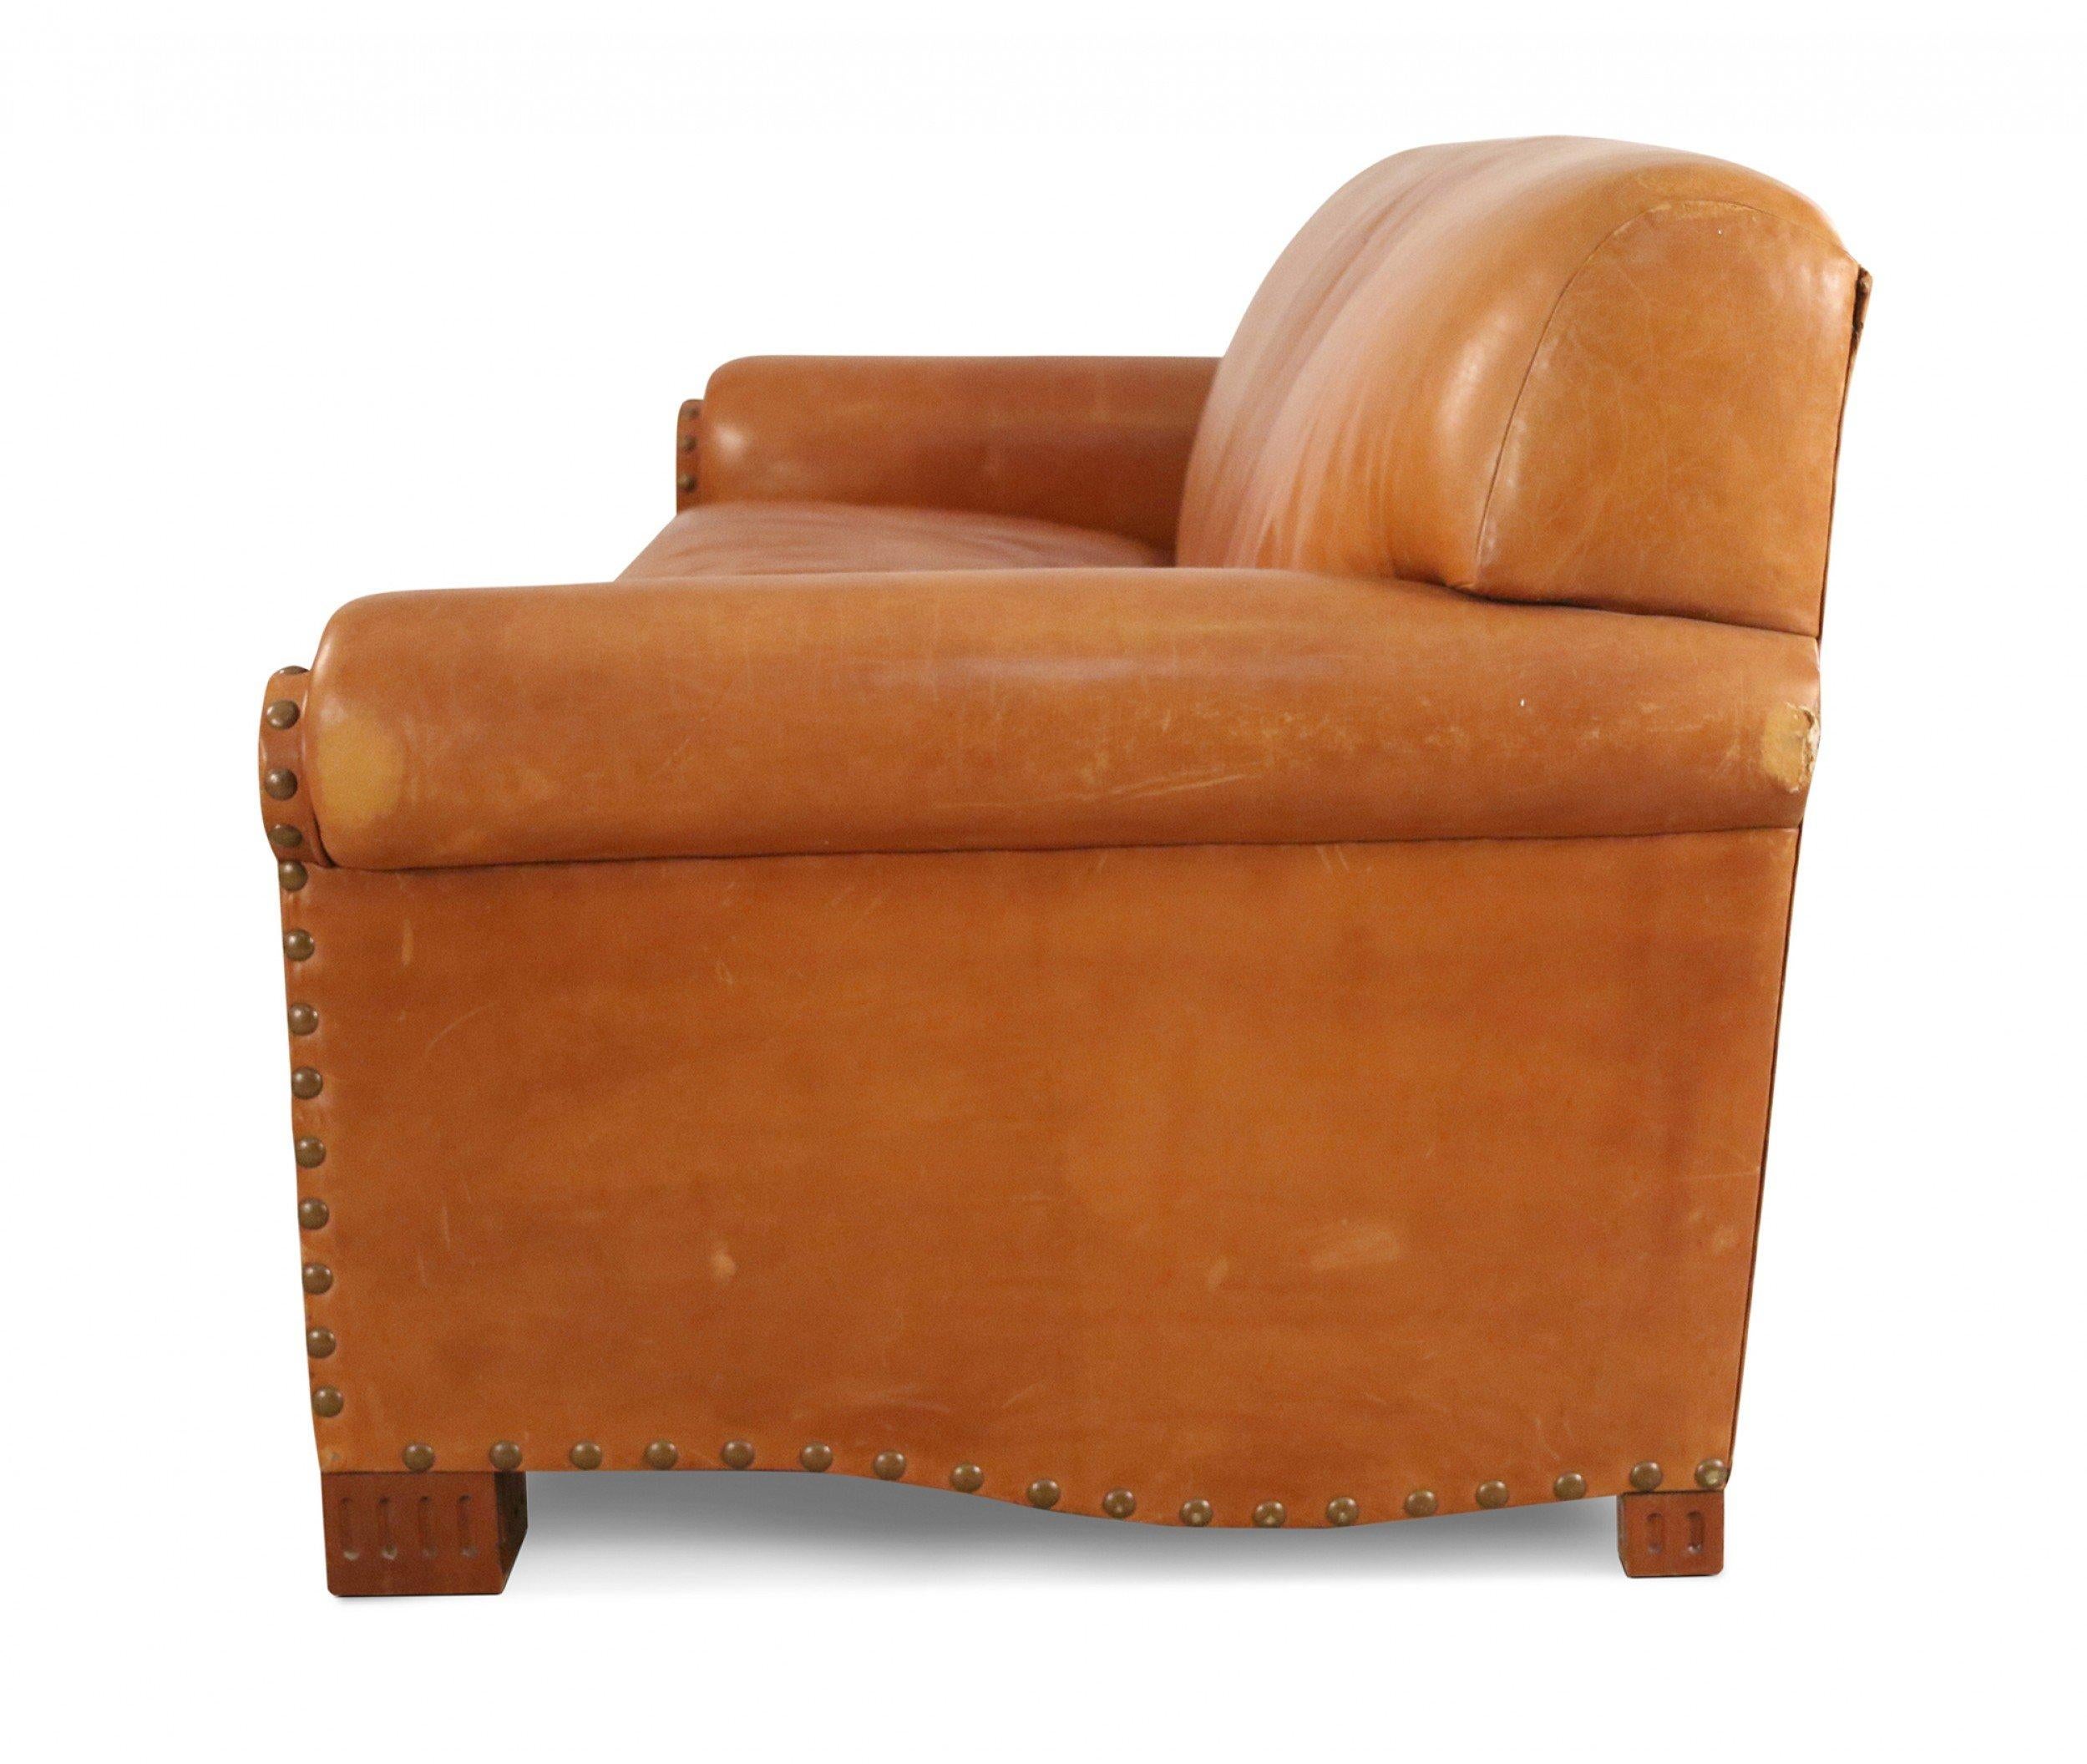 Modern Contemporary Caramel Brown Leather 3-Seat Sofa For Sale